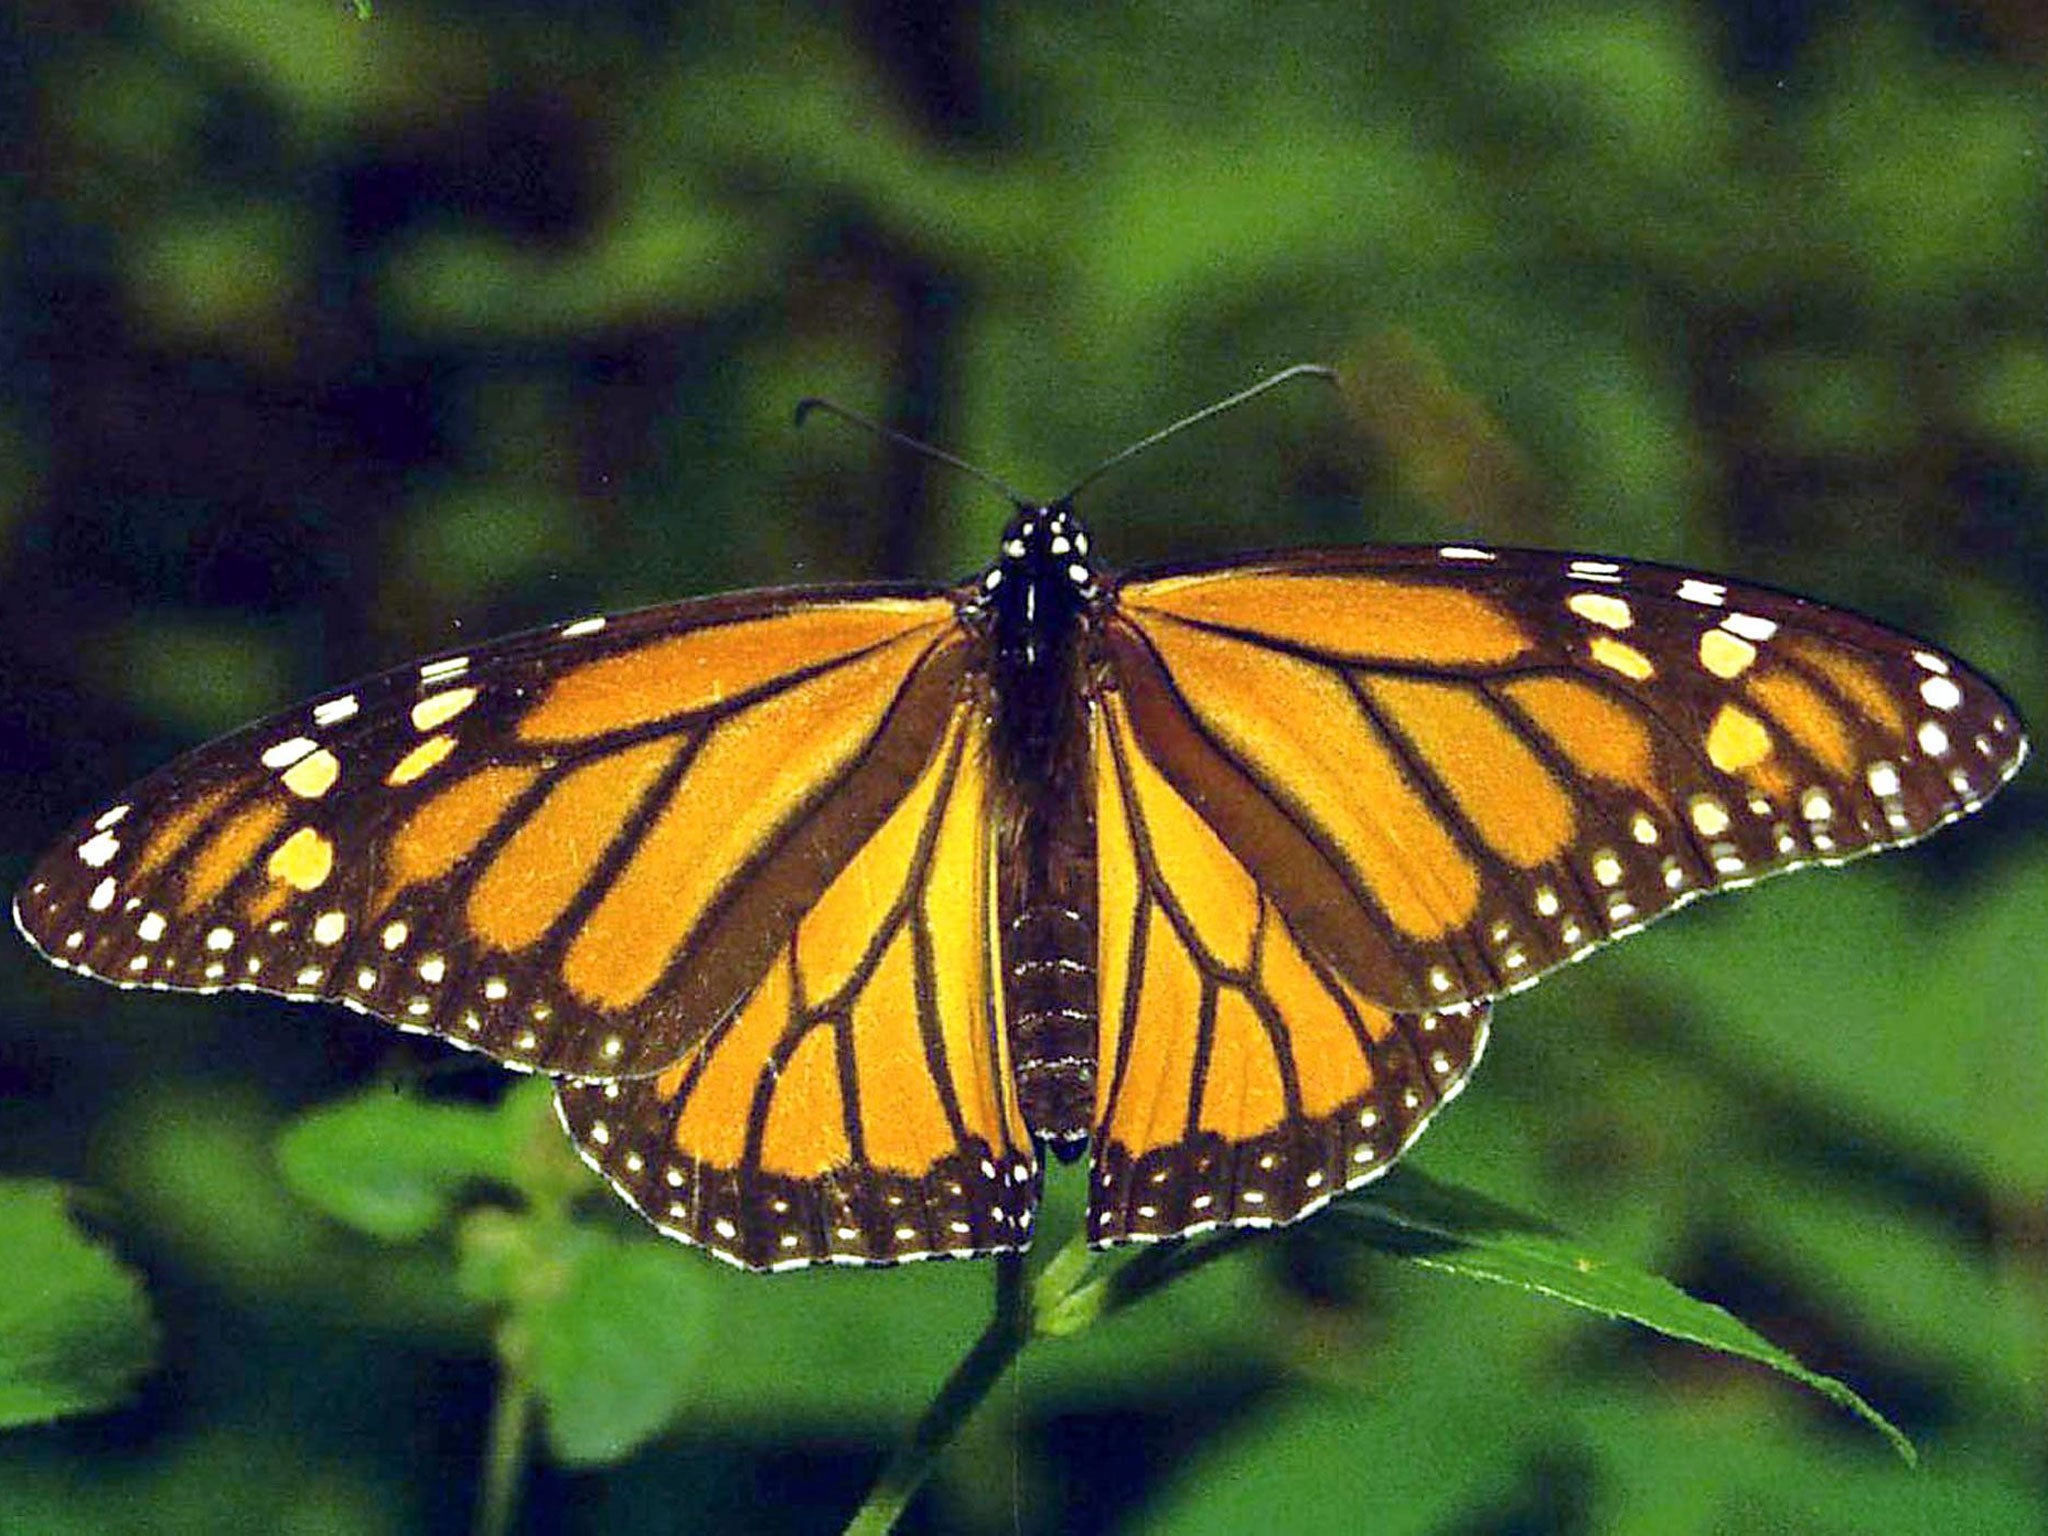 The Monarch butterfly